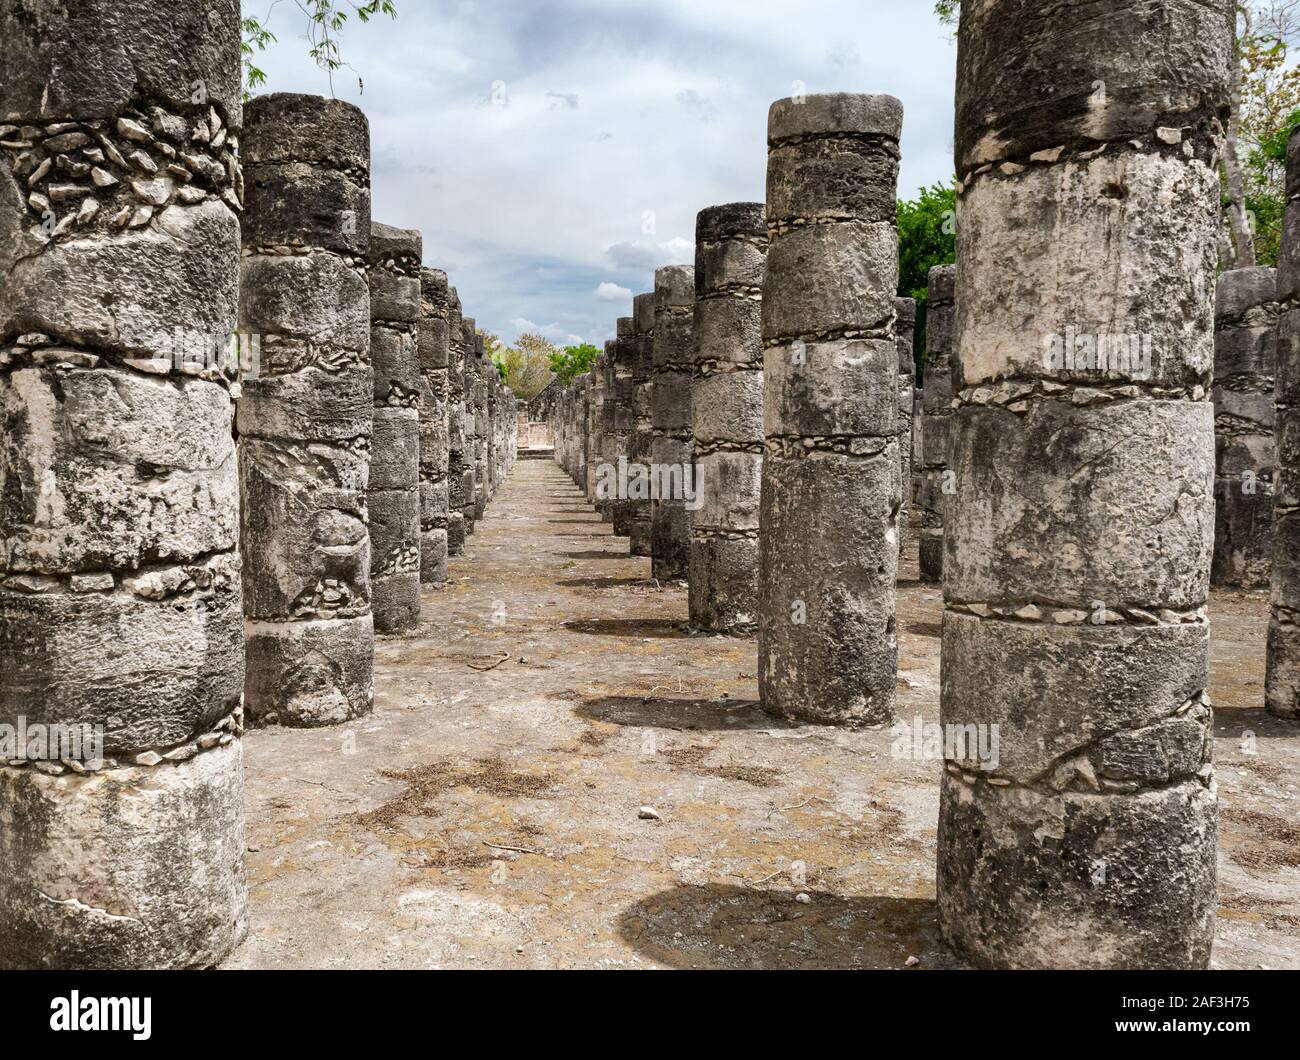 Thousand columns structure - Mayan ruins featuring carved pillars at Chichen Itza archaeological site. Stock Photo